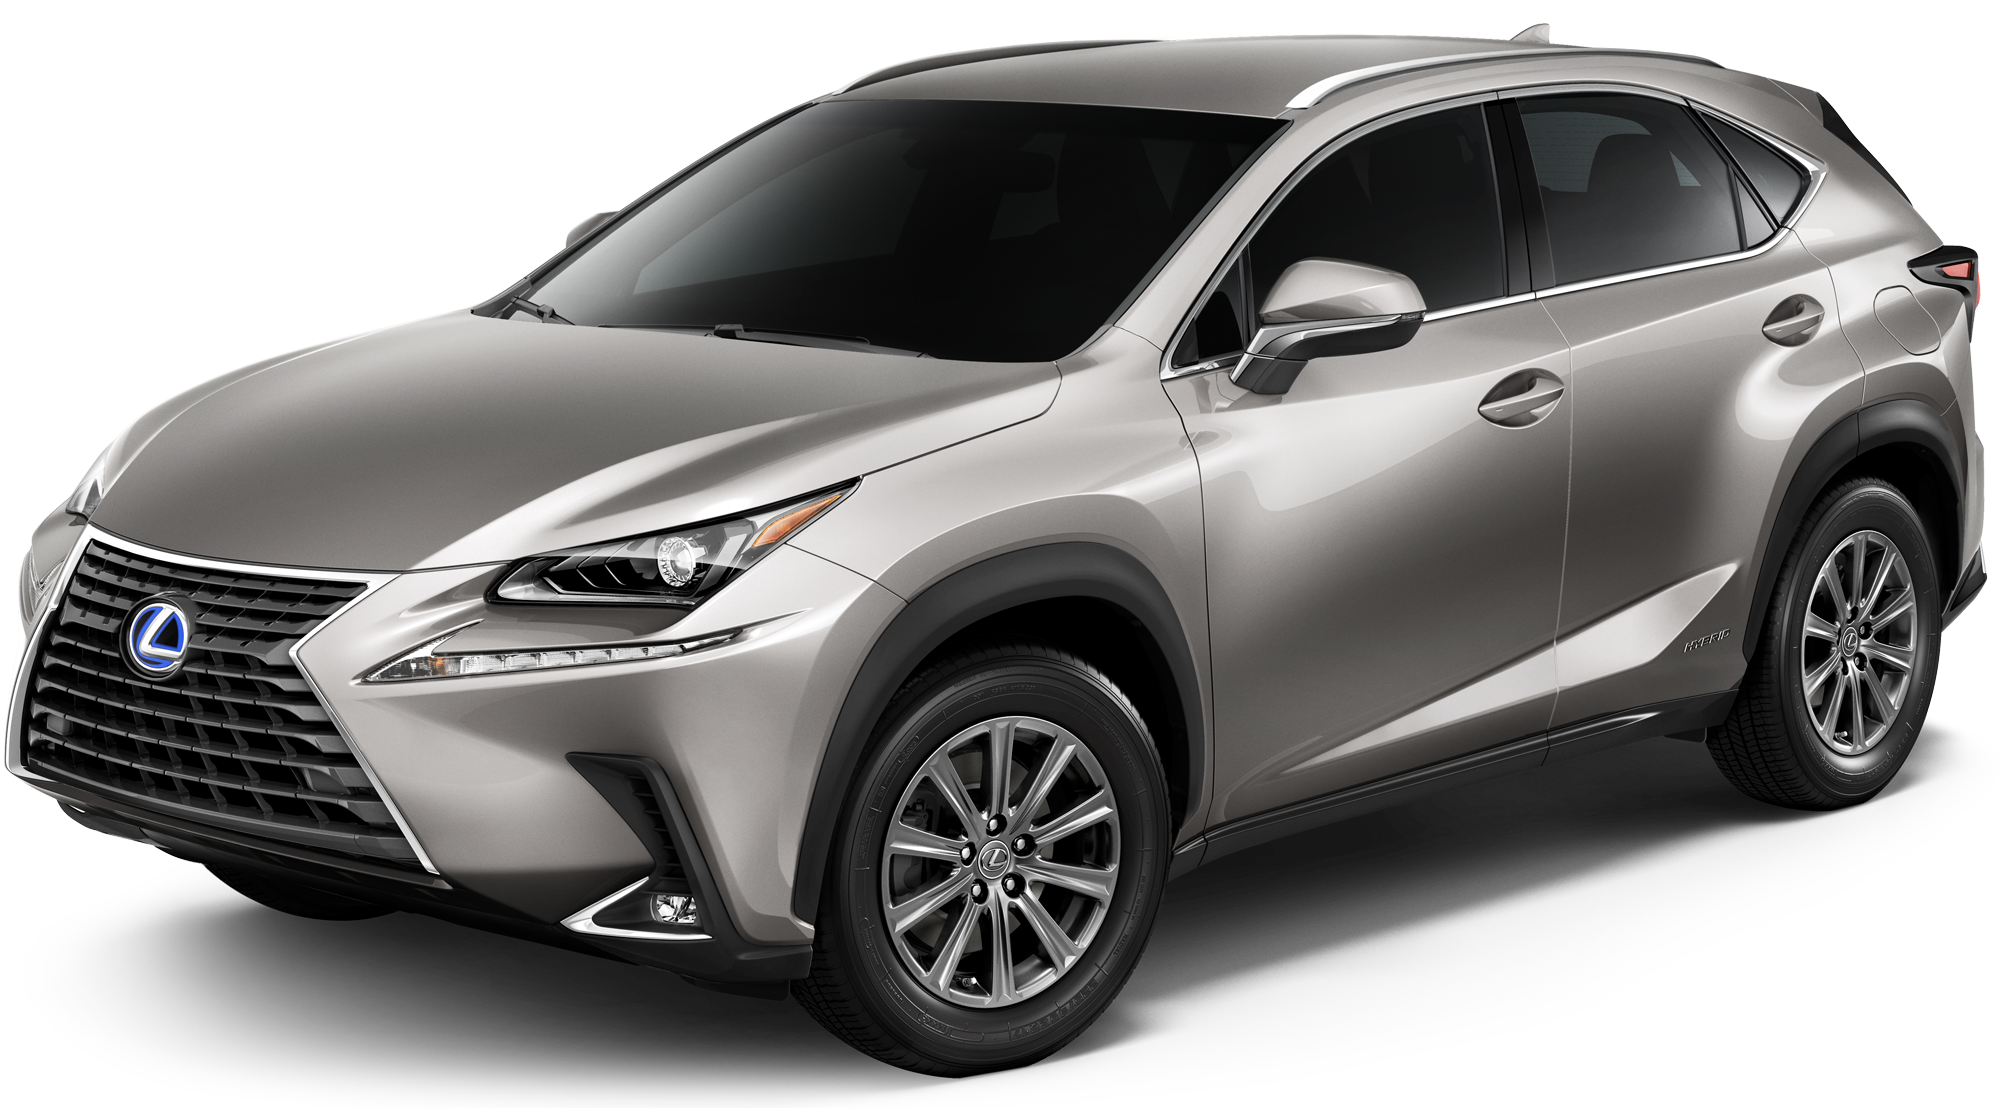 2020 Lexus NX 300h Incentives, Specials & Offers in Wayzata MN